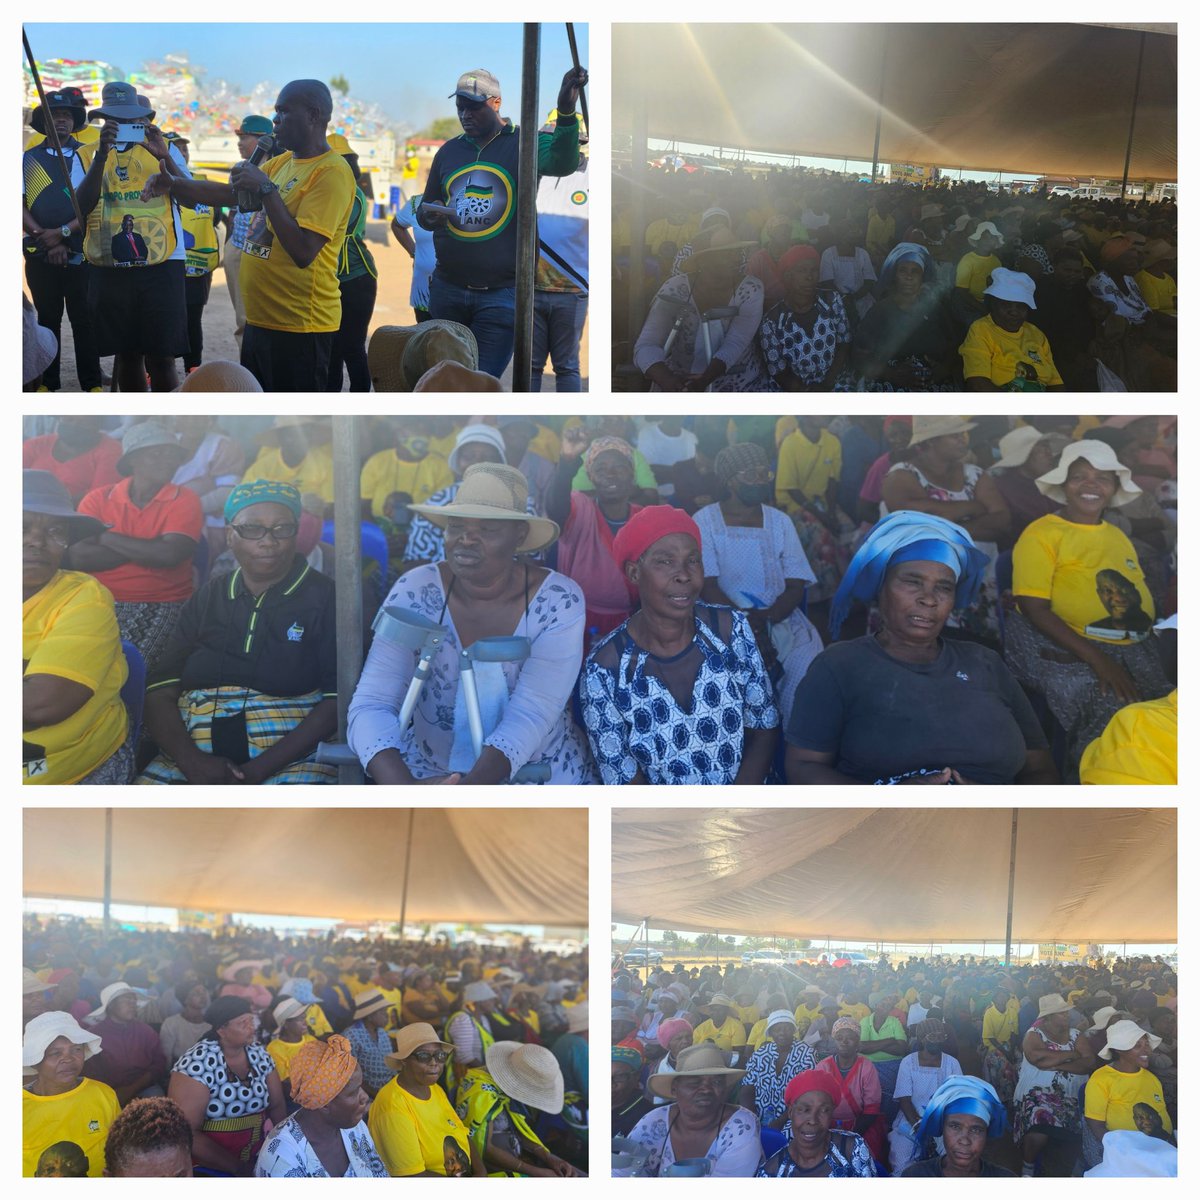 Ward 10 Polokwane today.🖤💚💛the ANC is here,it is alive and it leads✊🏾